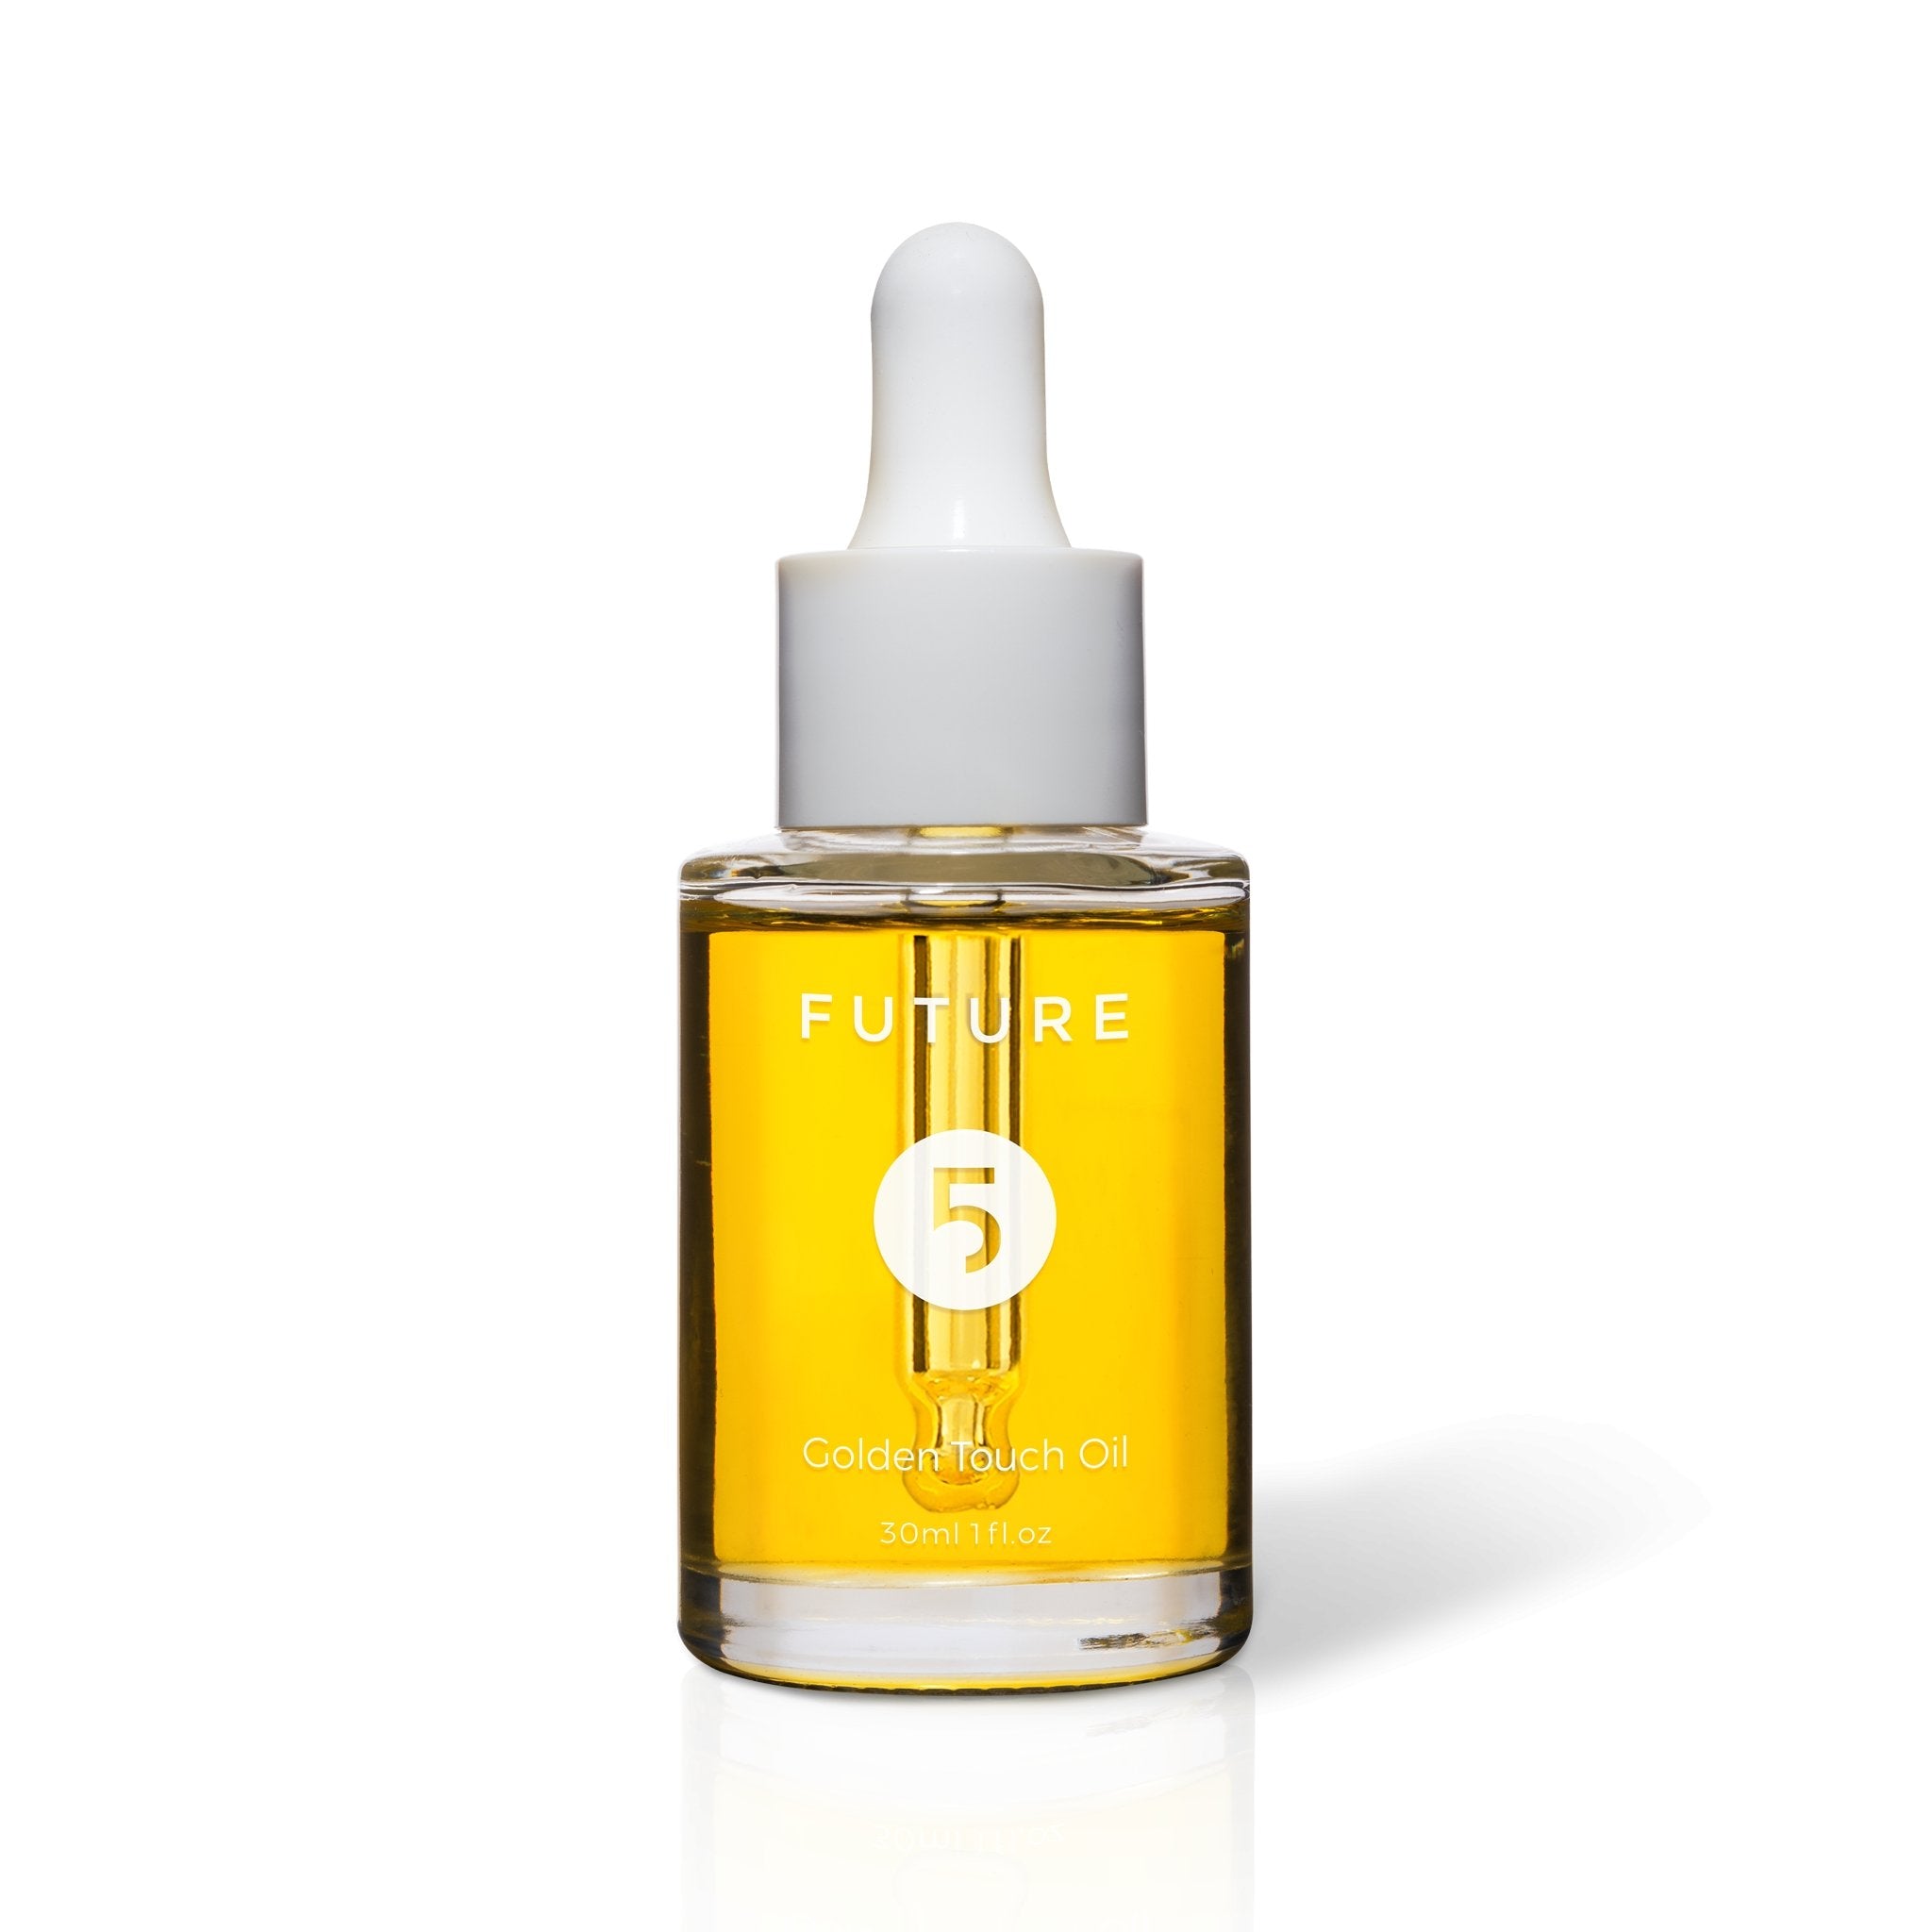 Golden Touch Oil - Future Cosmetics The 5 Elements